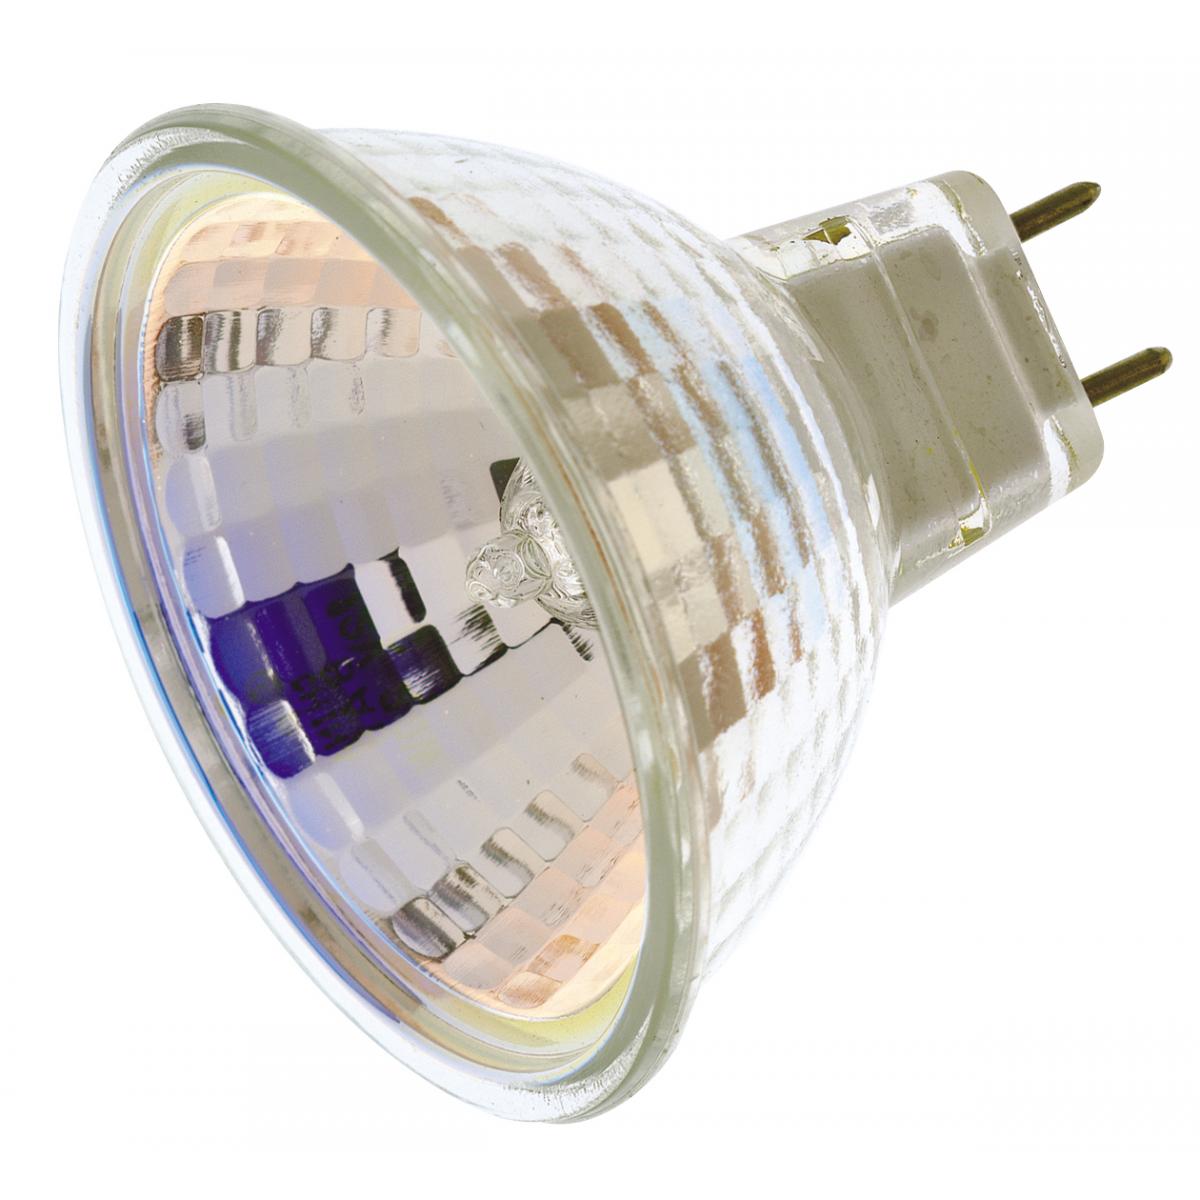 Satco S3445 20 Watt Halogen MR16 Clear 2000 Average rated hours Bi Pin G8 base 120 Volt Carded